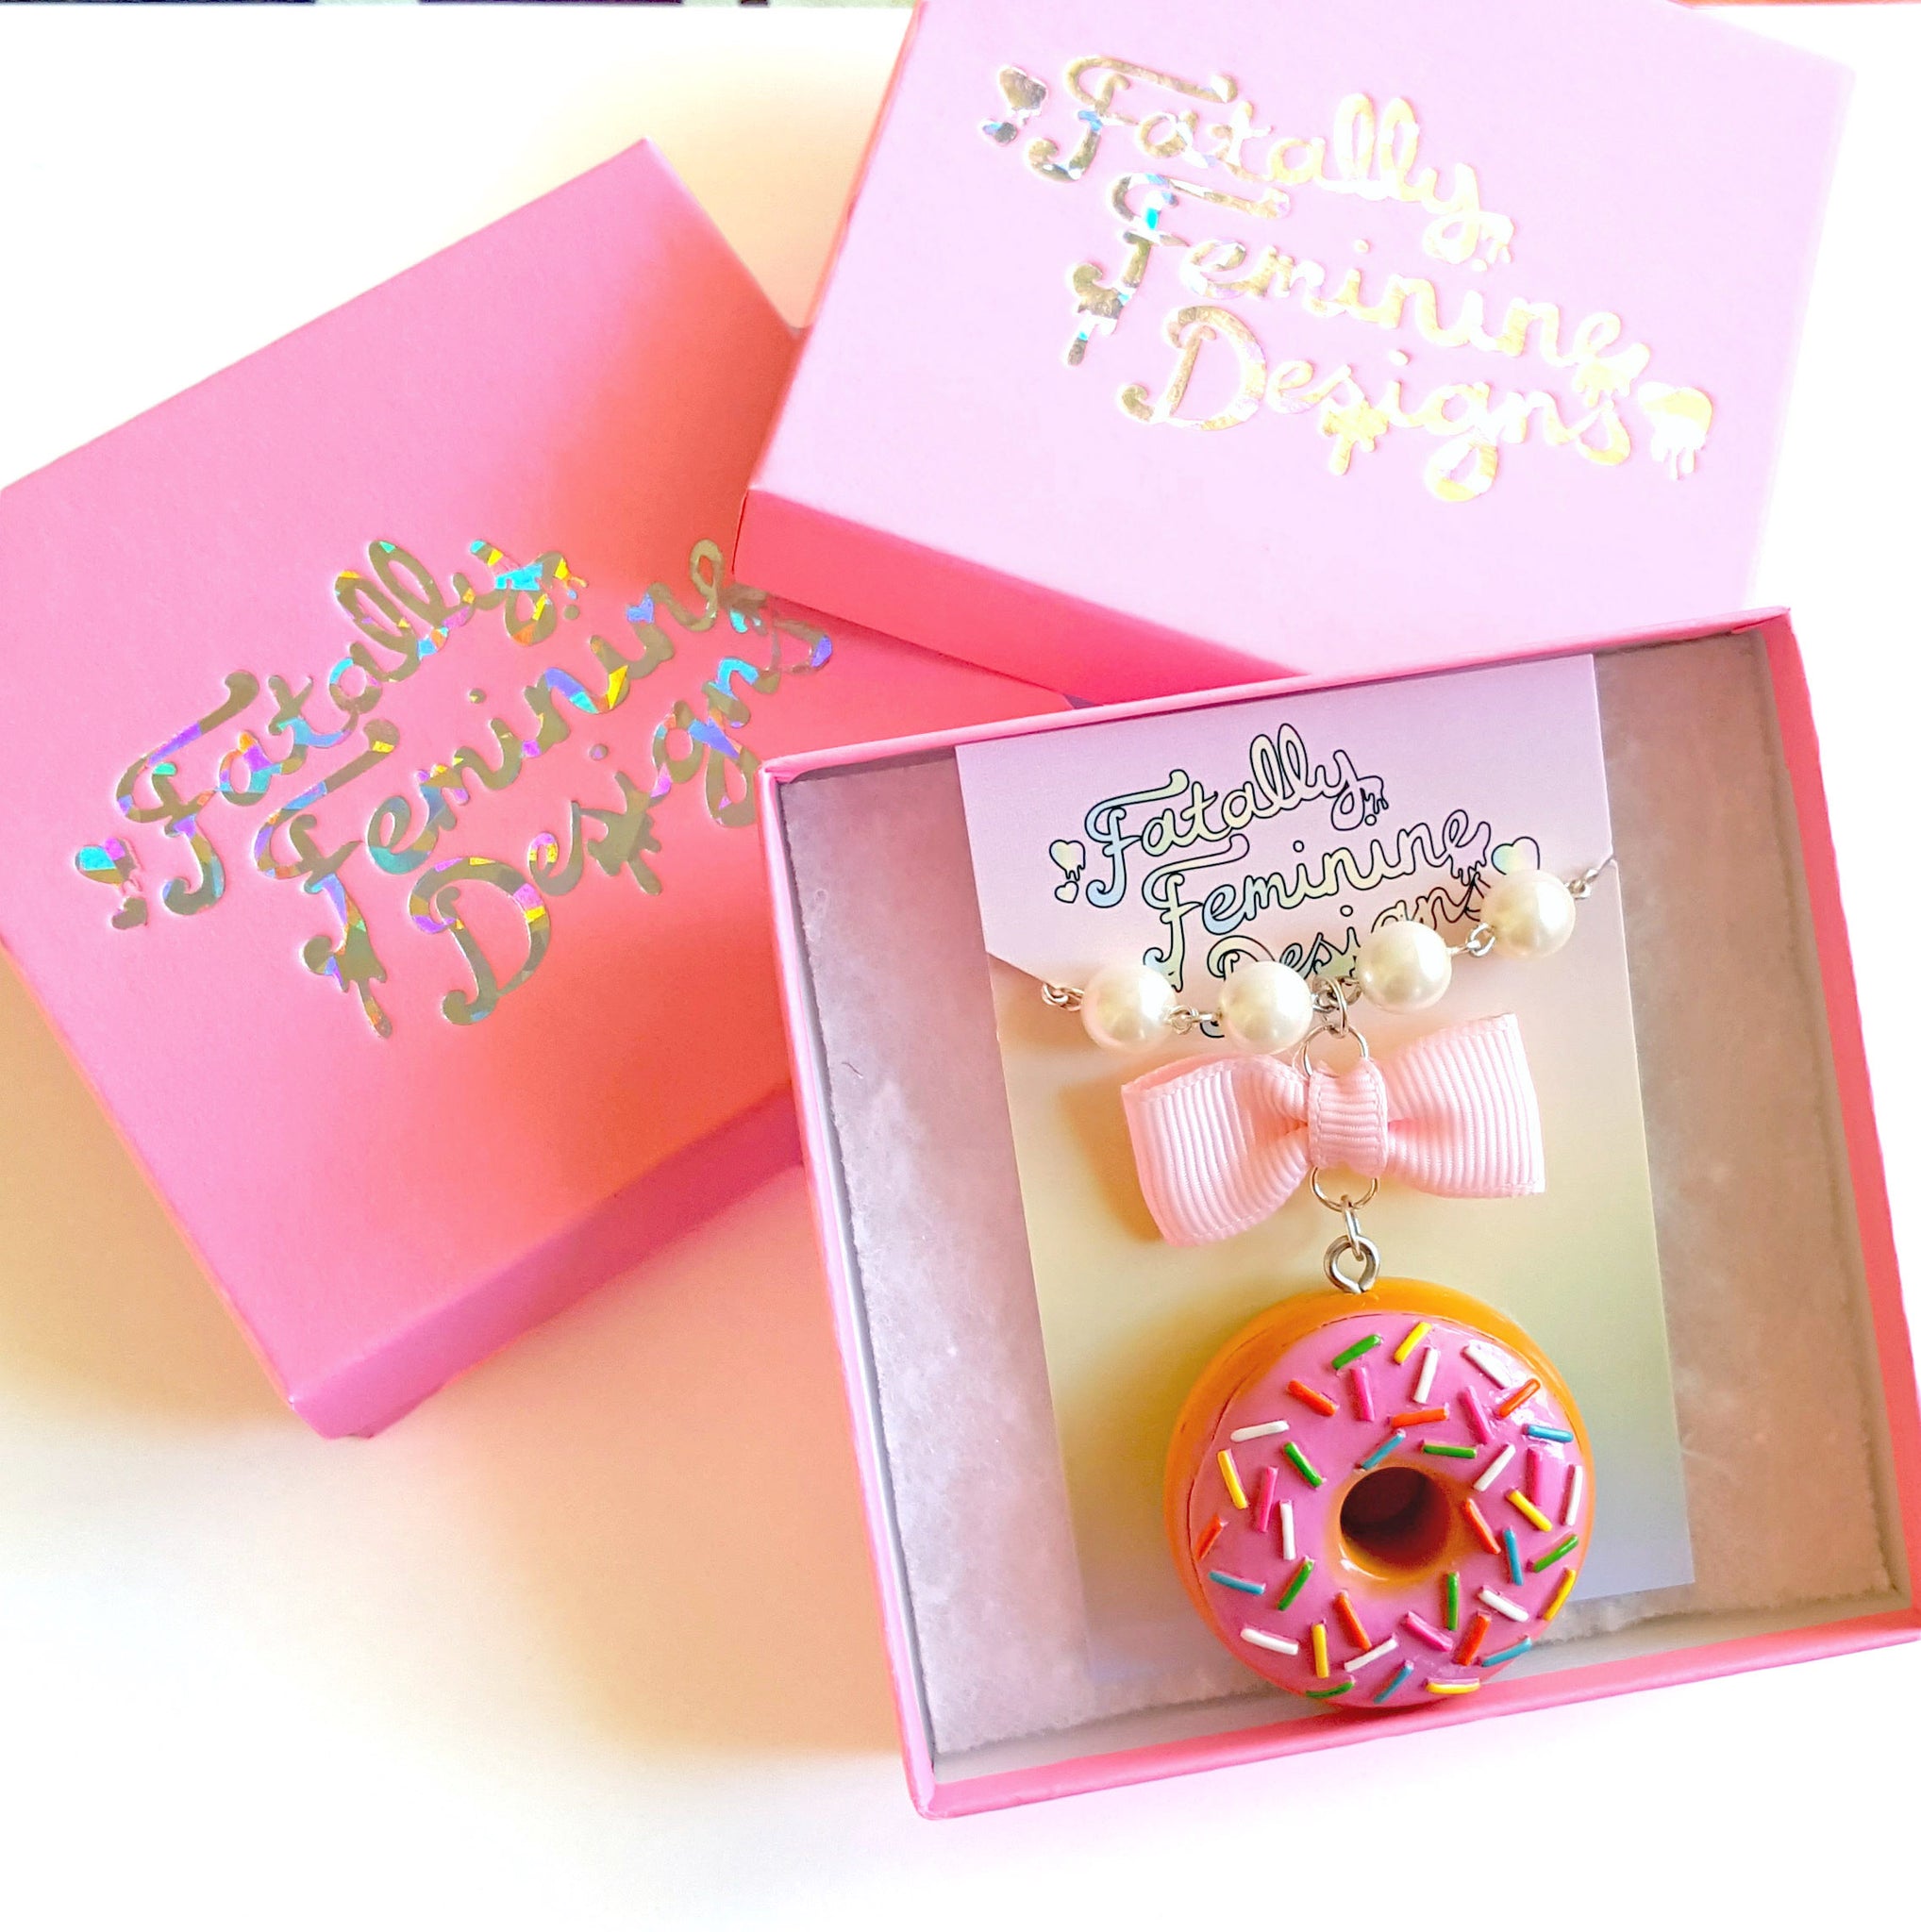 Tumbln' with Kiki magazine | Diy candy, Candy necklaces, Craft activities